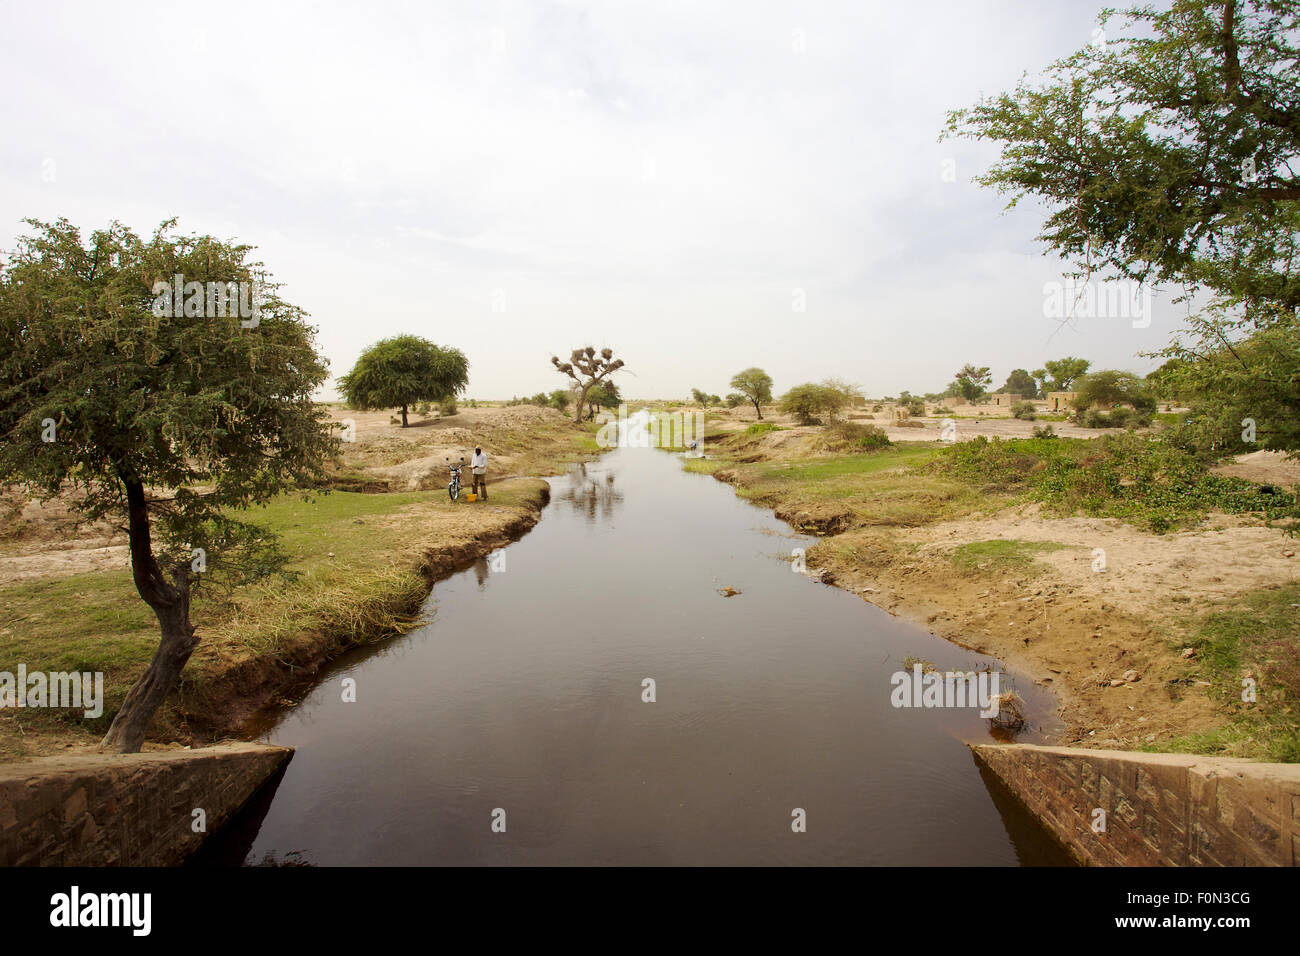 Agricultural irrigation system in Mopti, Mali Stock Photo